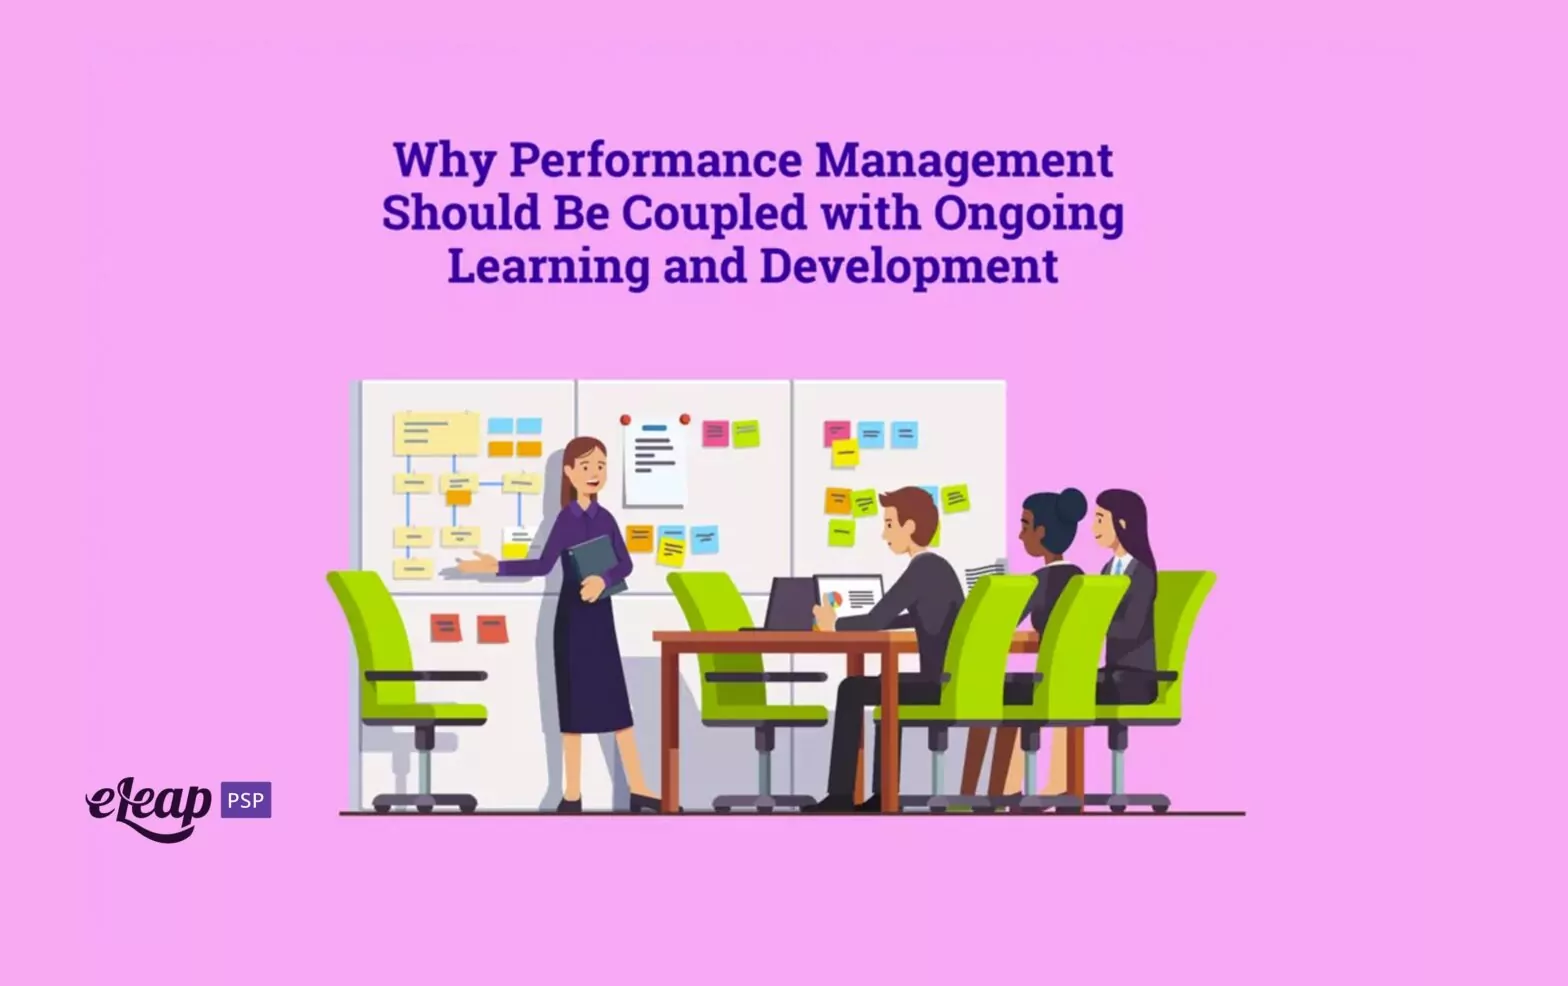 Why Performance Management Should Be Coupled with Ongoing Learning and Development